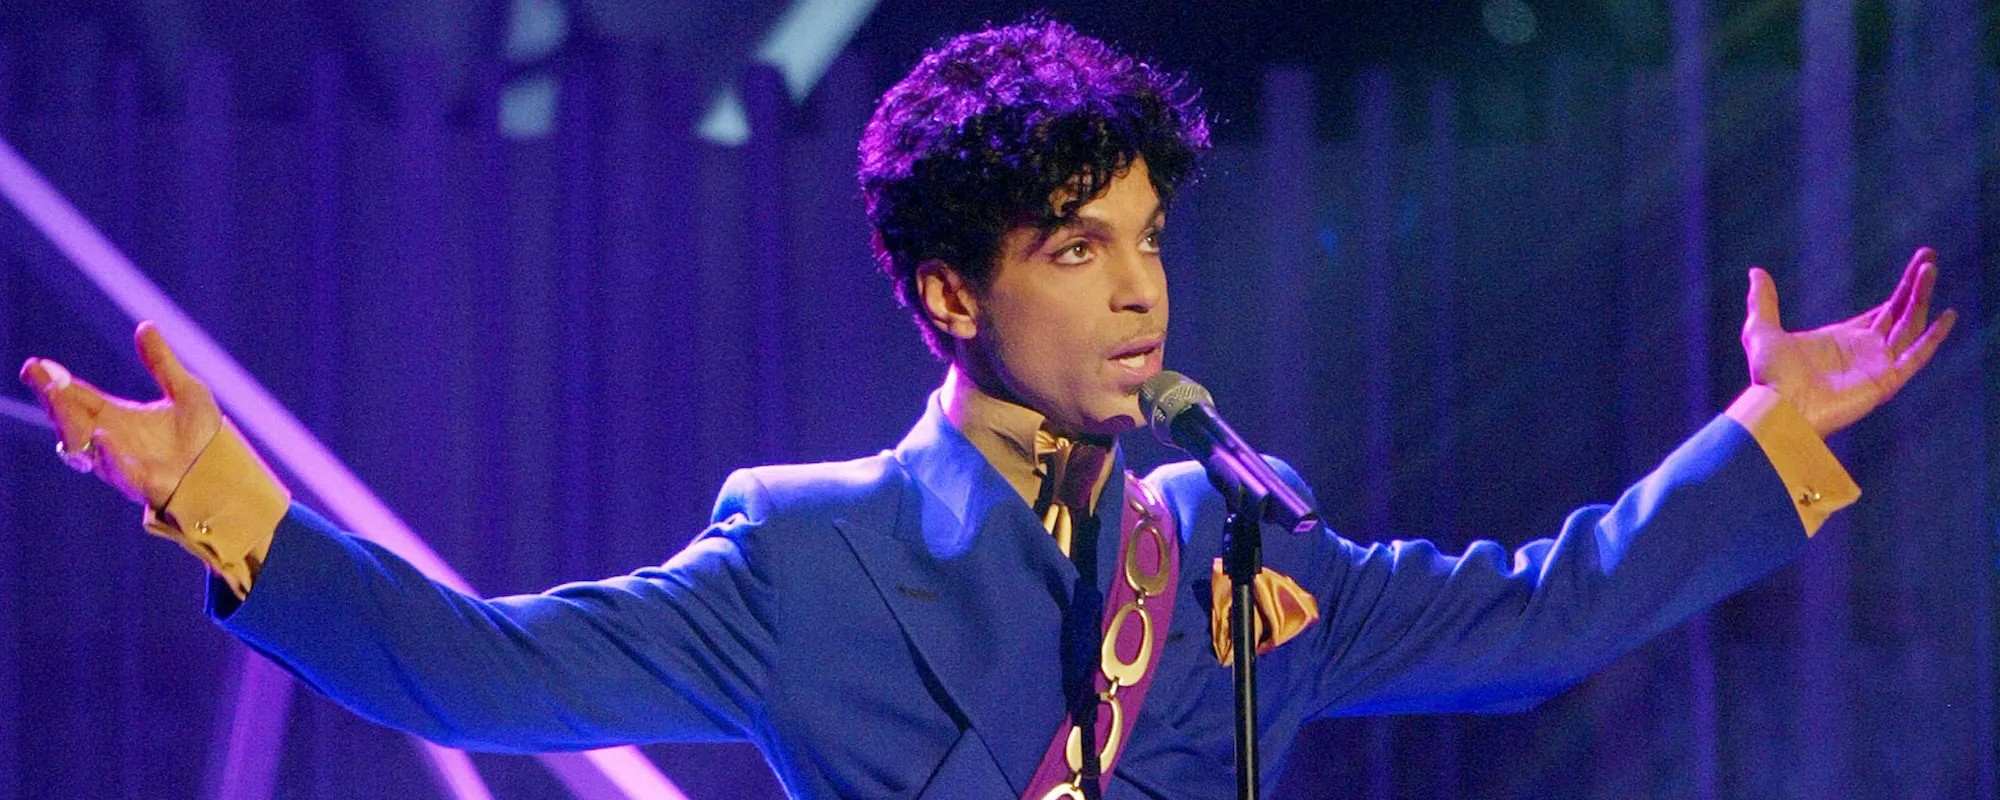 Prince Considered for Posthumous Congressional Gold Medal